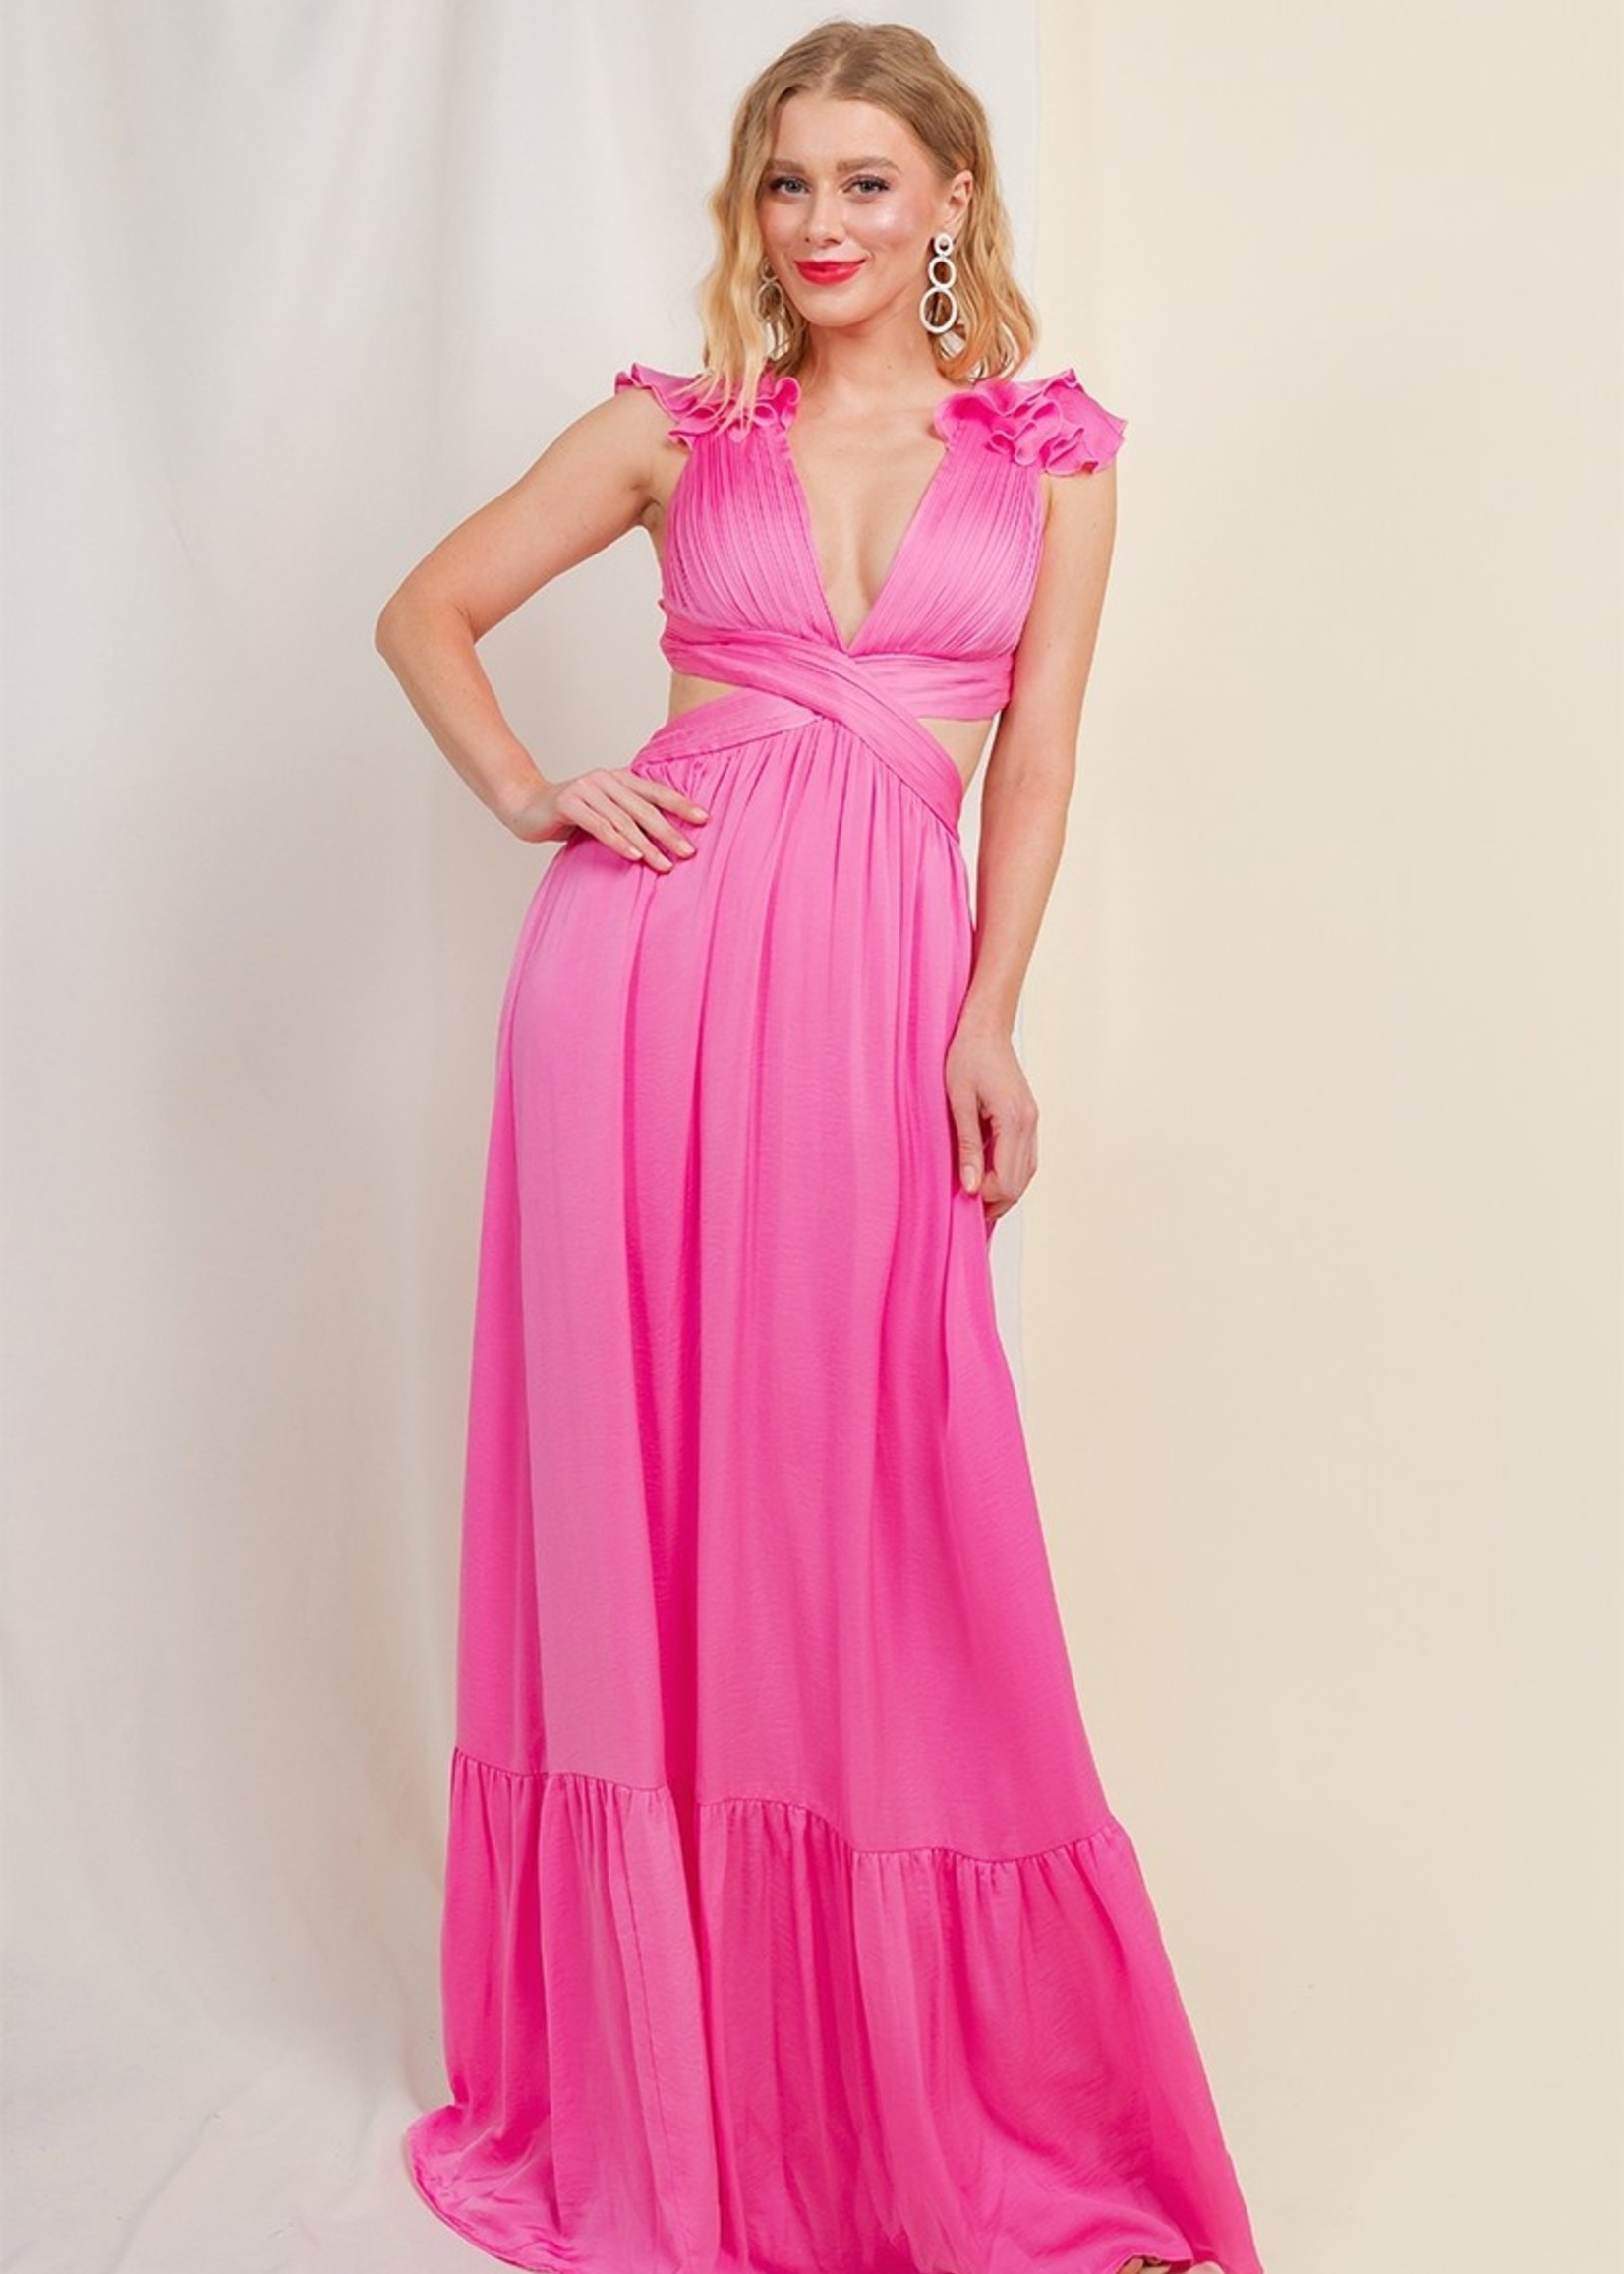 Minuet Angie Ruffle Formal Gown